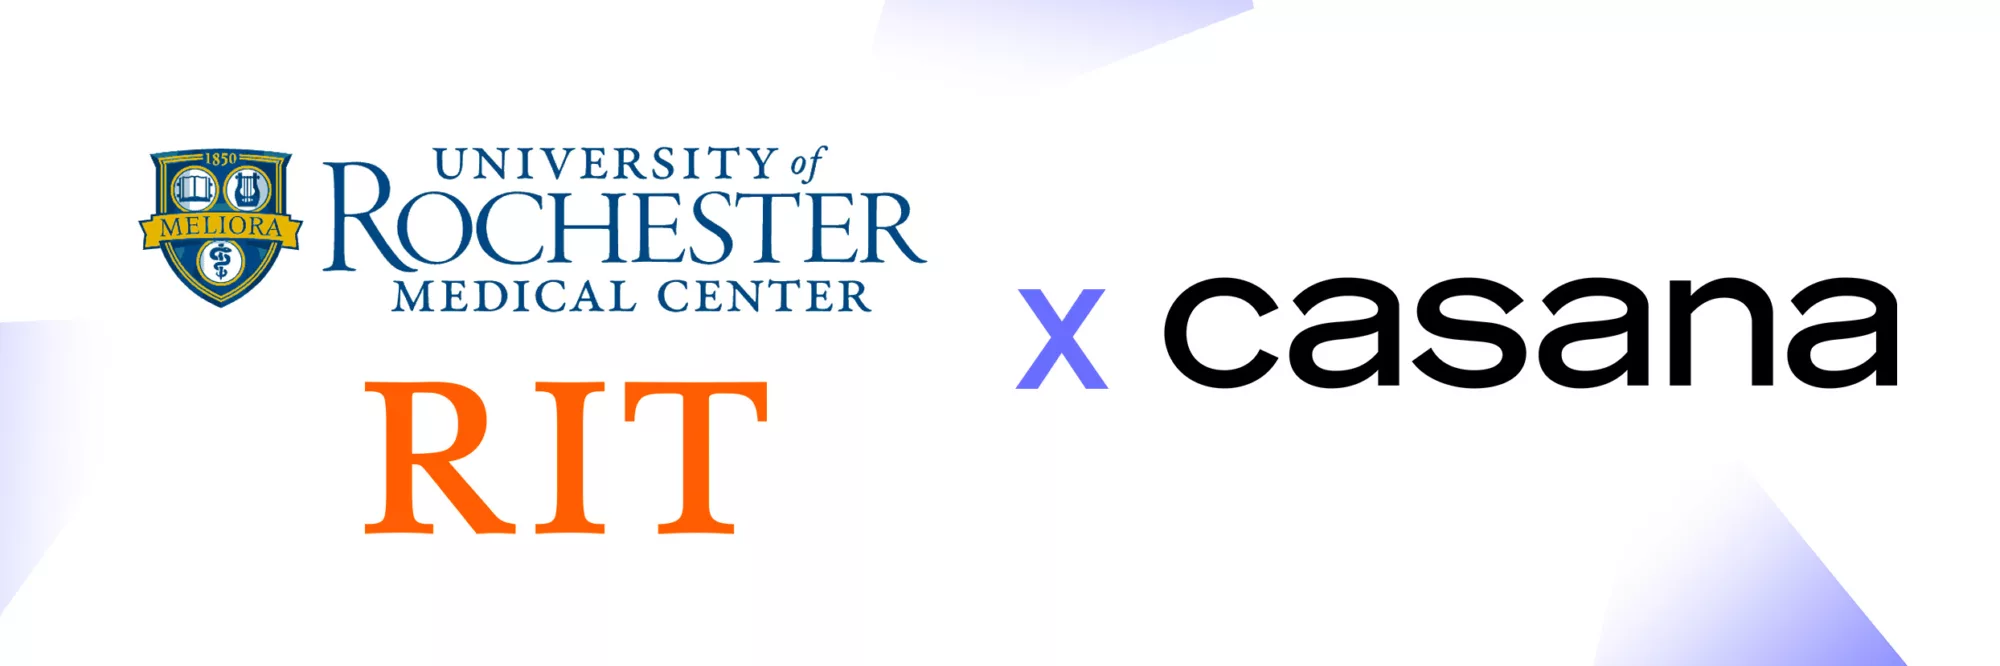 Rochester Institute of Technology University of Rochester Medical Center and Casana Partner for Inconspicuous Daily Monitoring Study